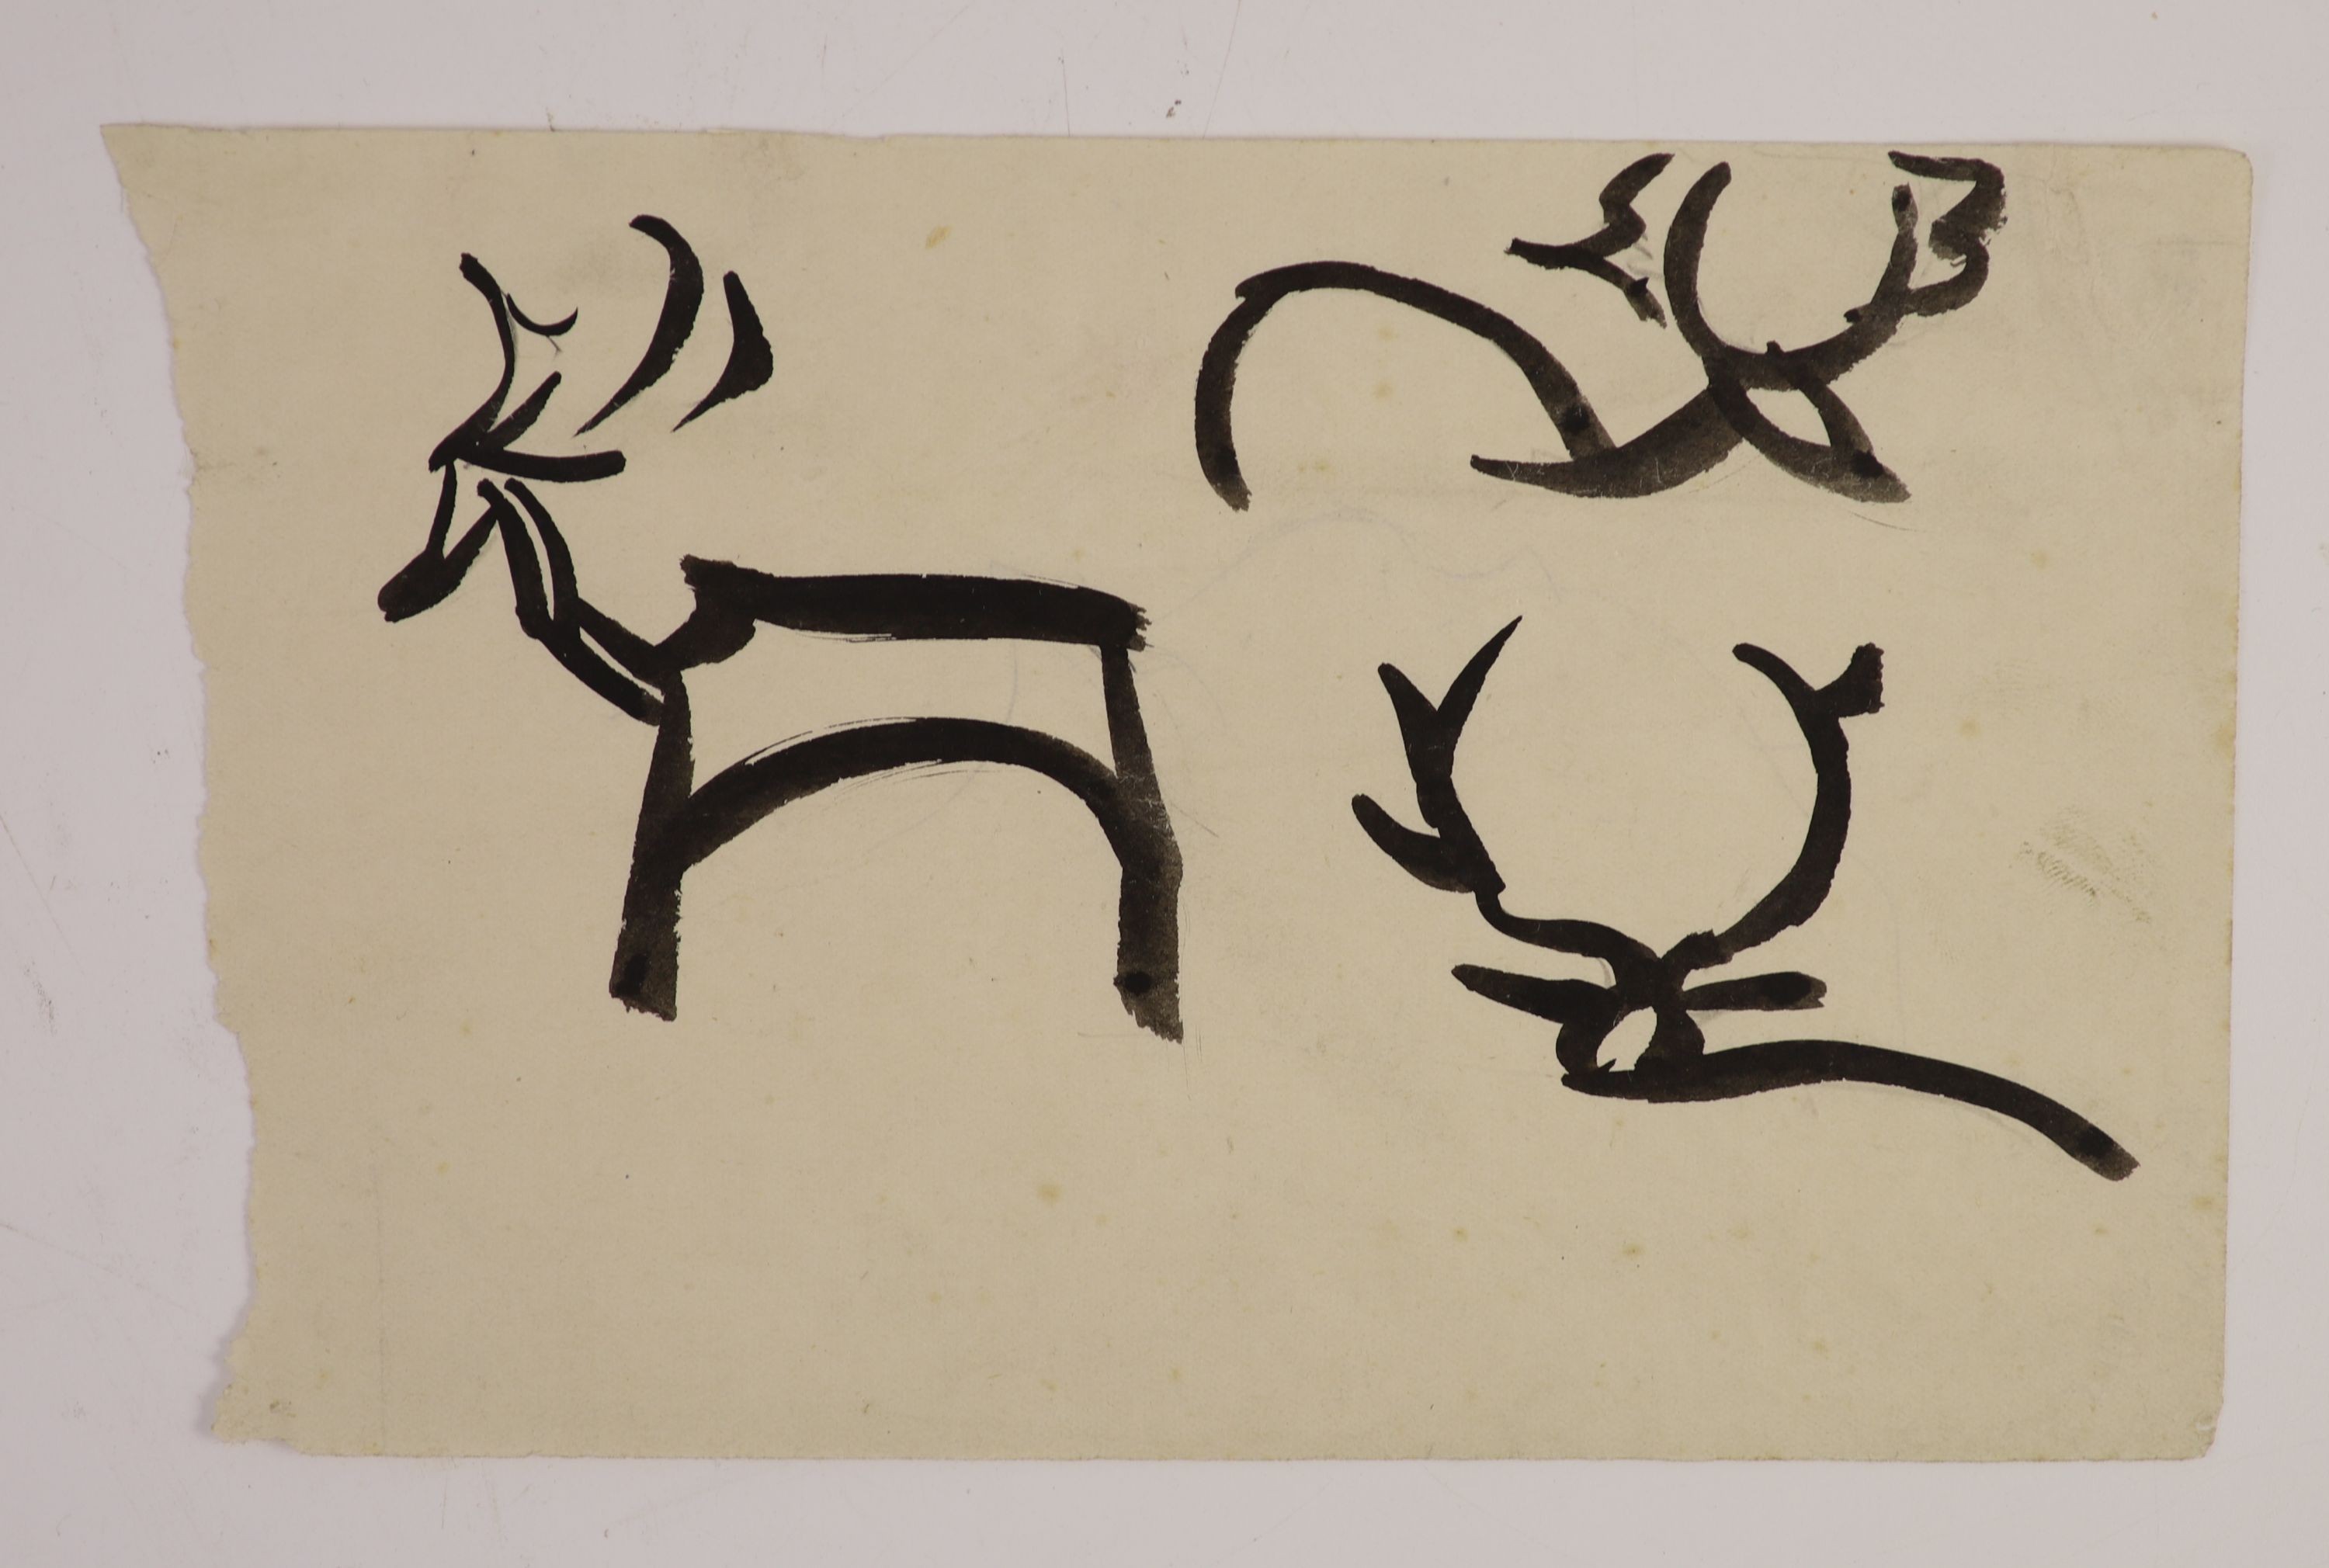 Henri Gaudier-Brzeska (1891-1915), Abstract drawing of a stag and antlers, black ink on paper, and an unfinished pencil sketch of a child’s head to verso, on paper, 14 x 20cm, unframed